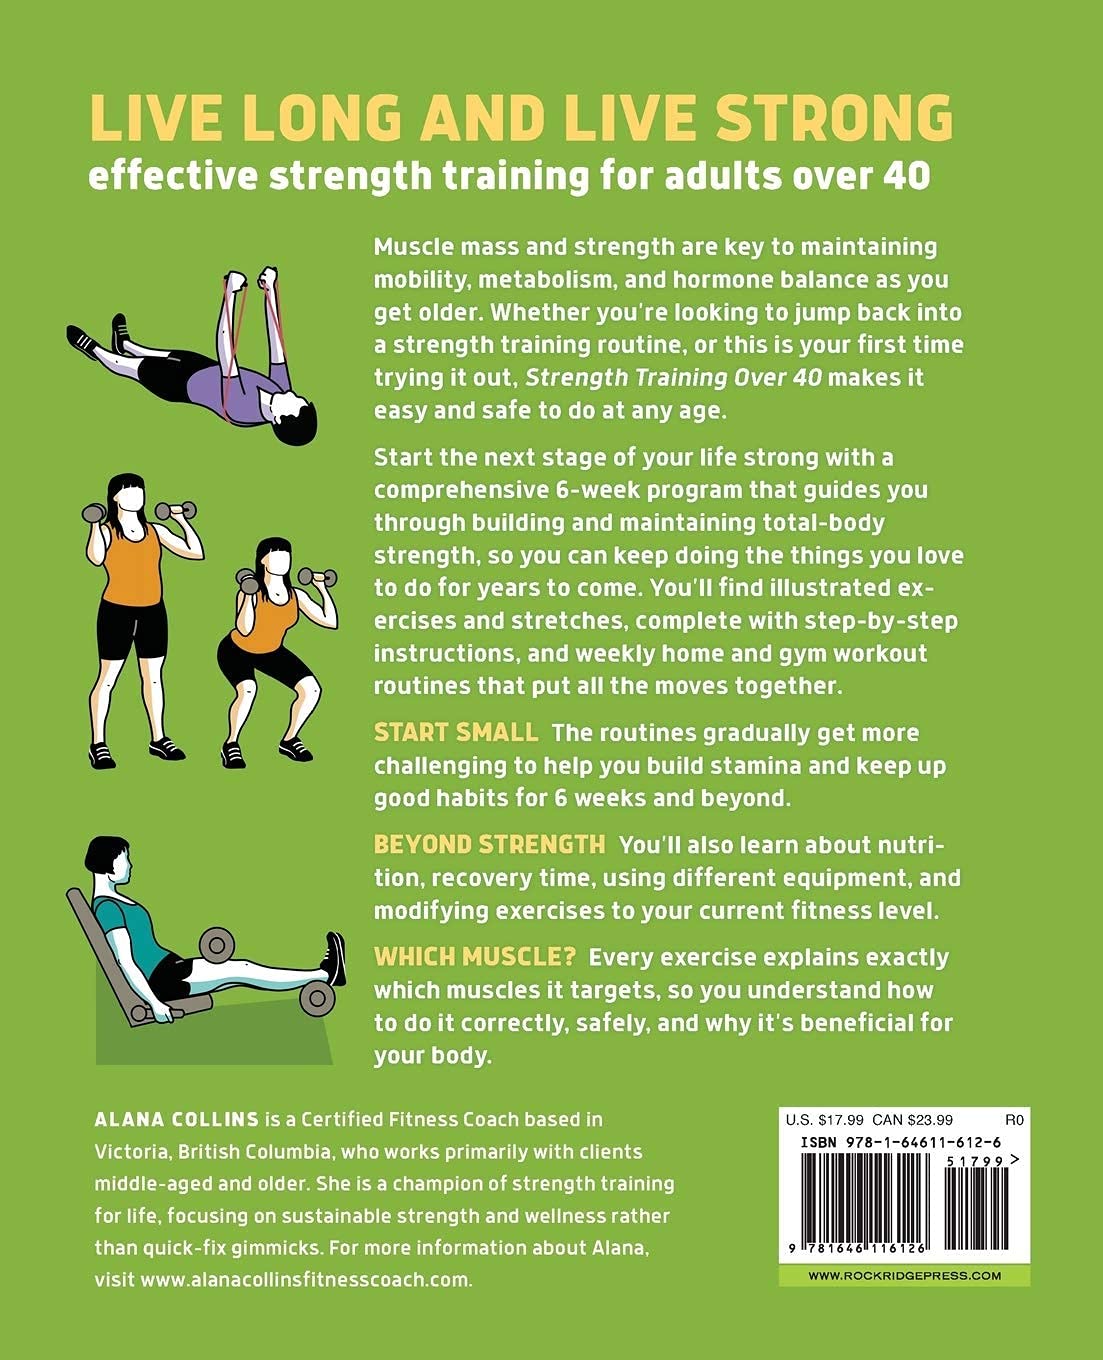 Strength Training Over 40: A 6-Week Program to Build Muscle and Agilit –  Lay it Flat Publishing Group